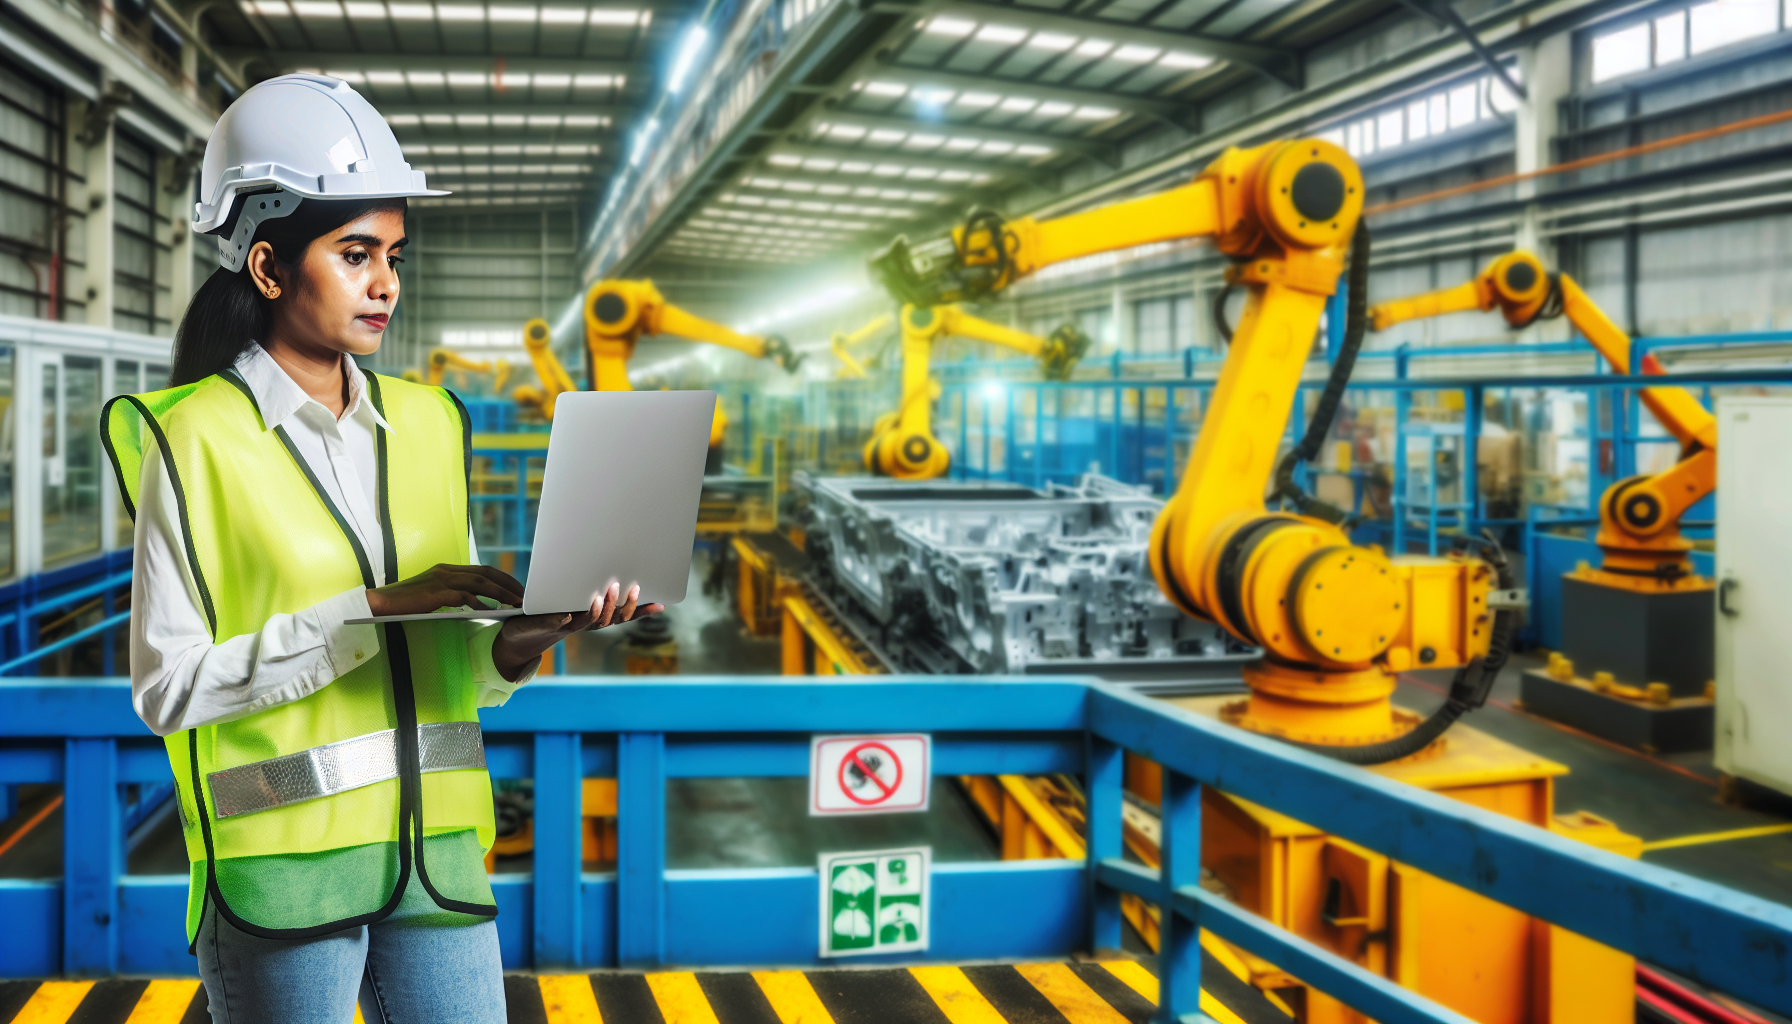 Nokia Launches AI-Enhanced Industrial Solutions for Workers